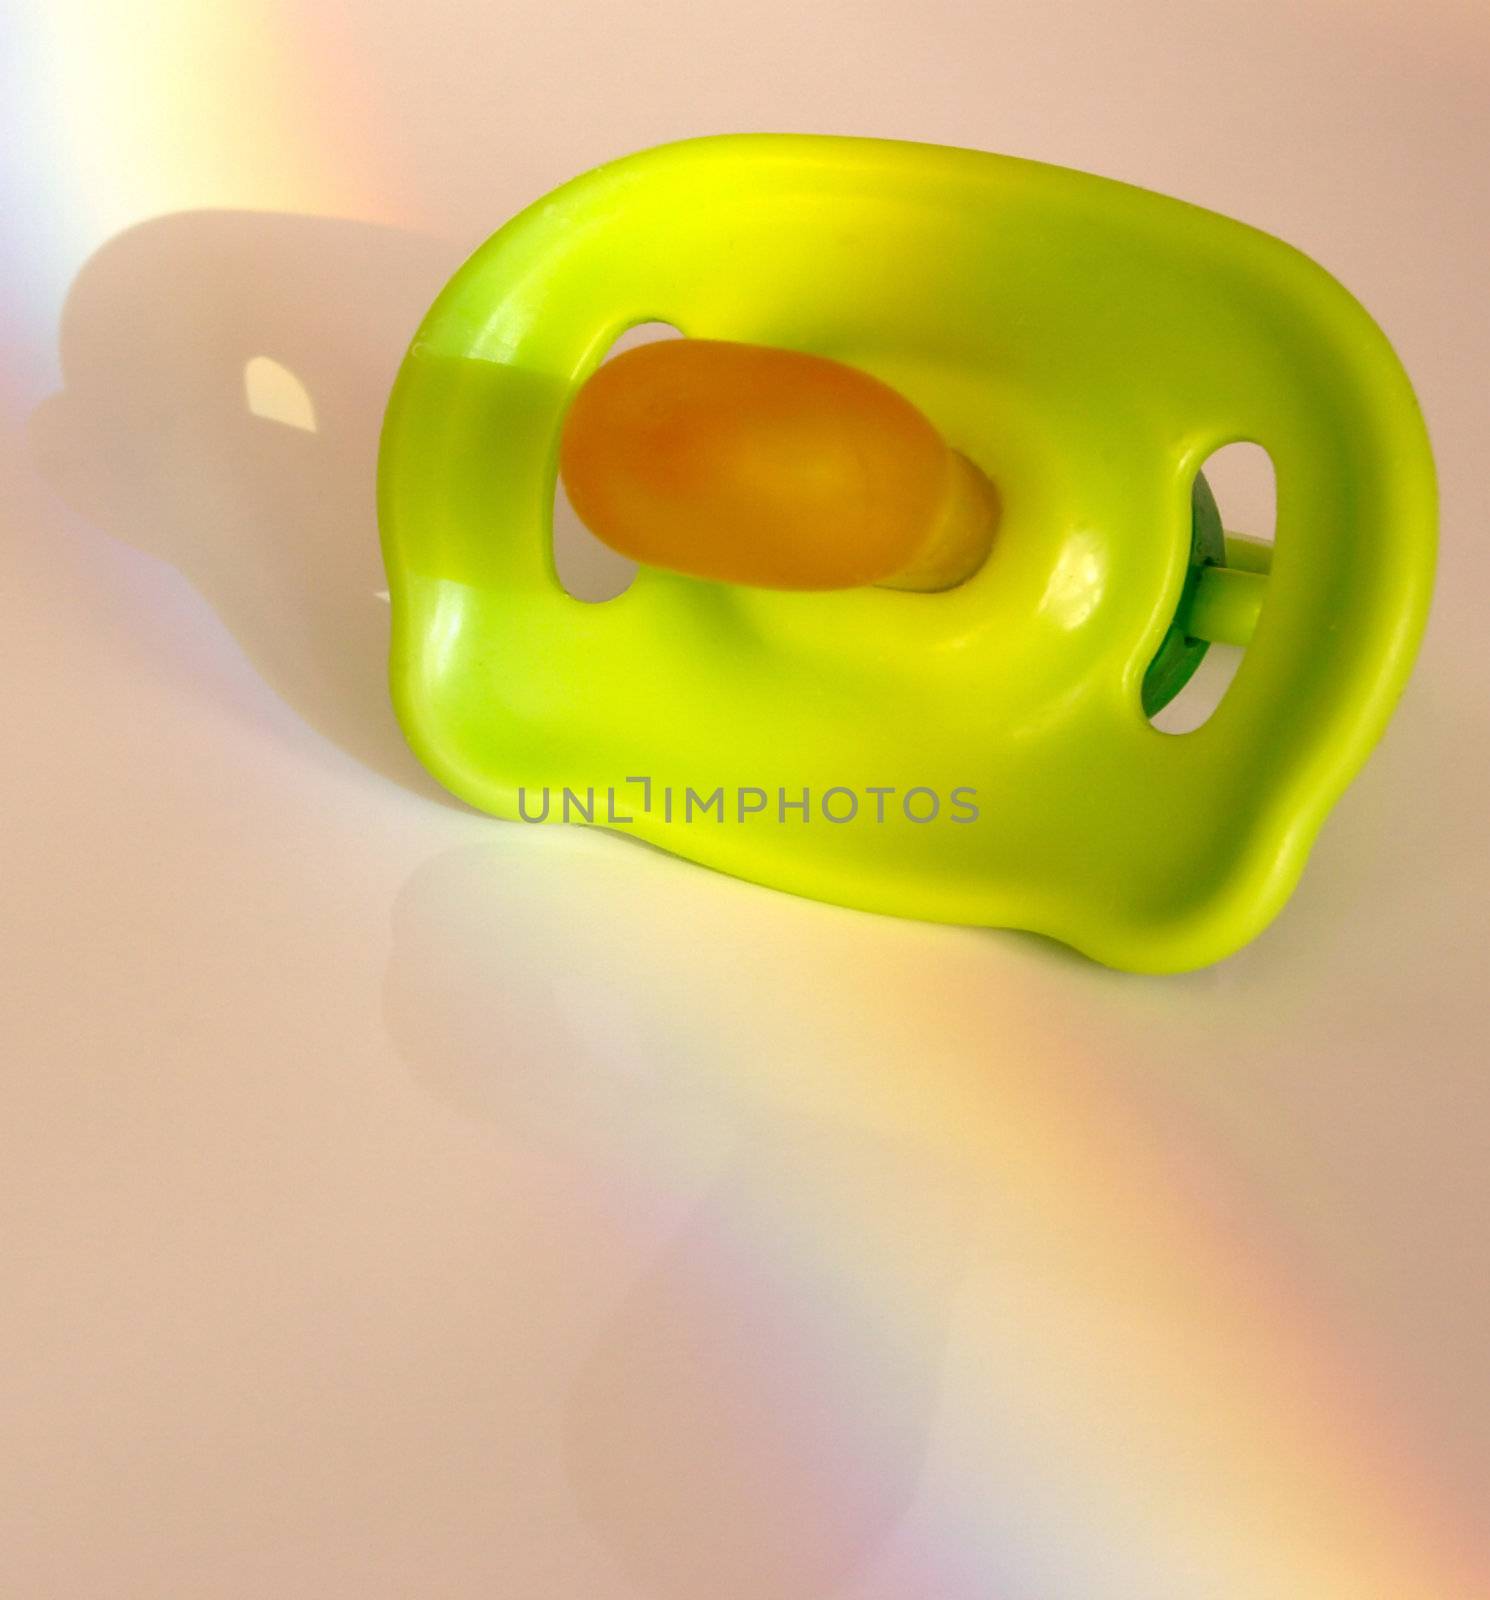 childs dummy with a rainbow across it